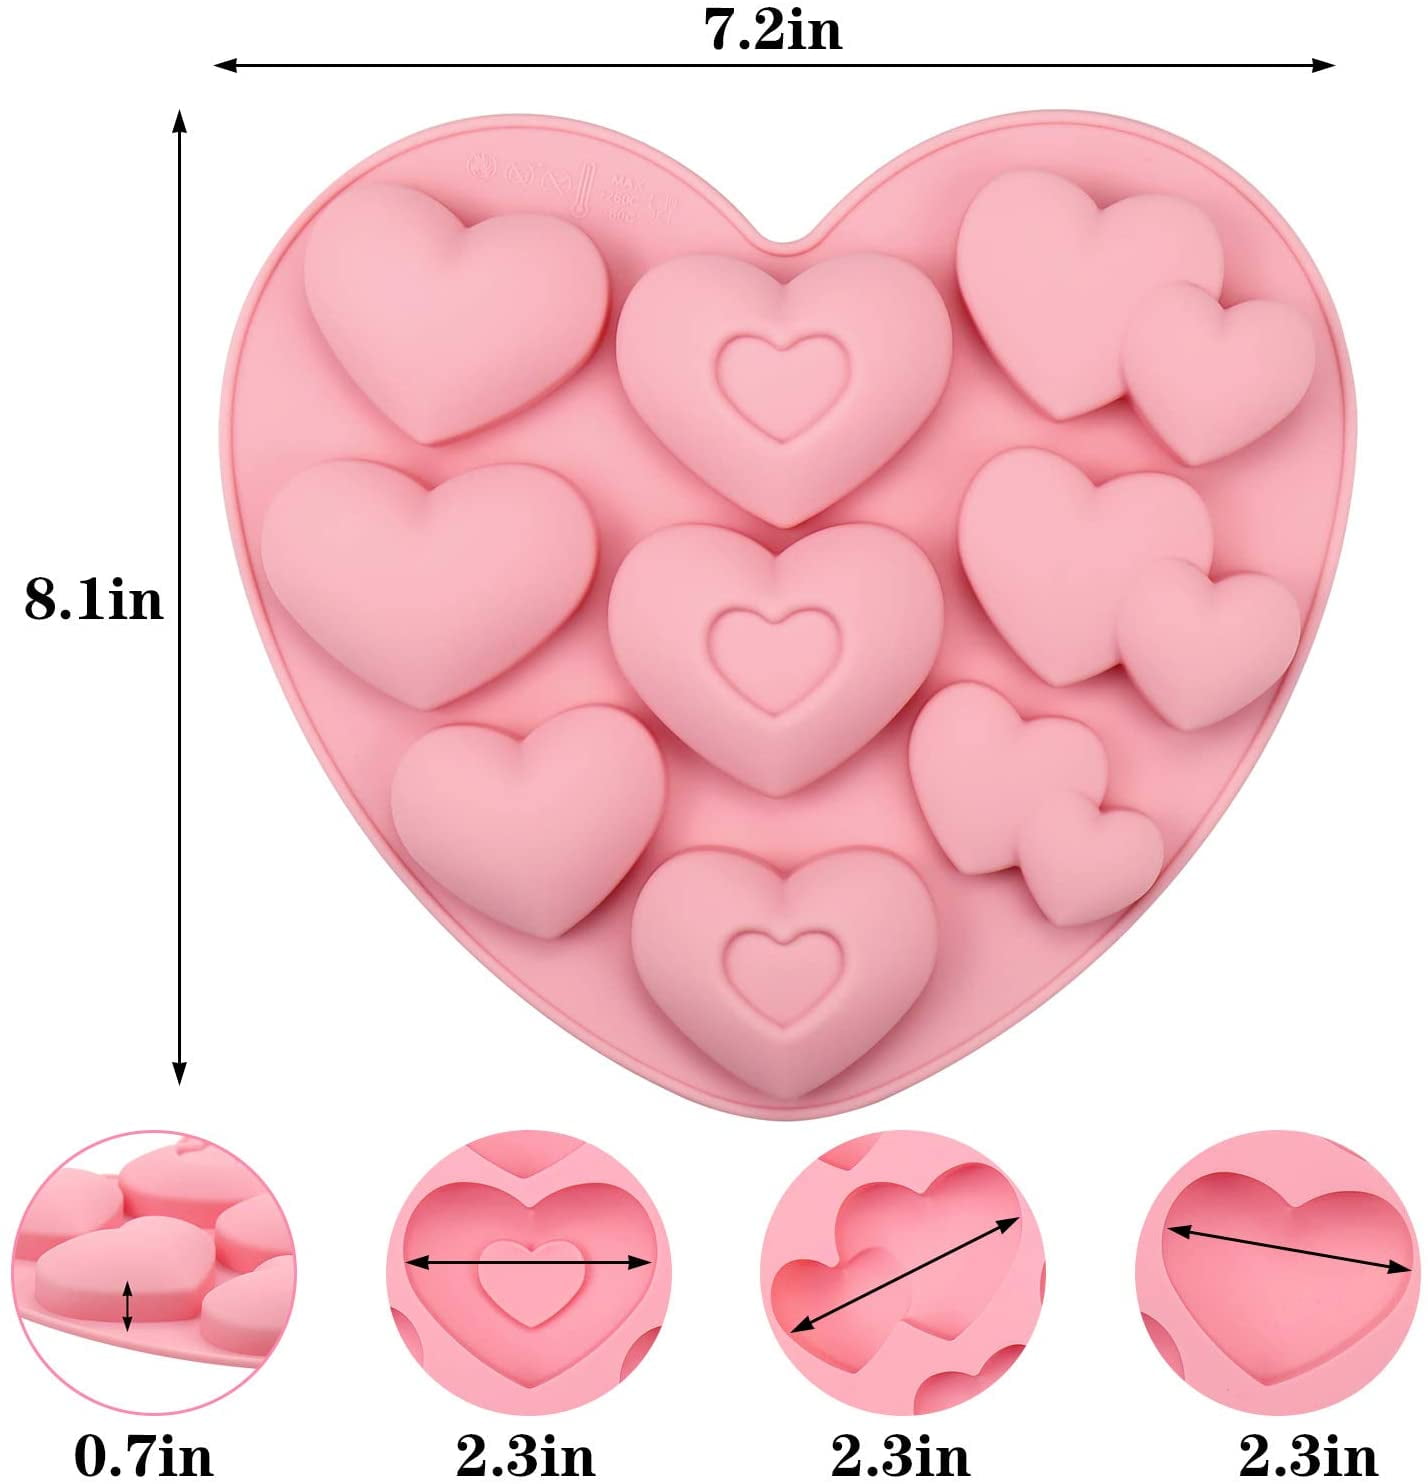 New 15 Cavities Mini Love Heart Chocolate Mold Silicone Candy Molds Diamond  Gummy Jelly Mould Cake Decoration Accessories From Doorkitch, $4.78